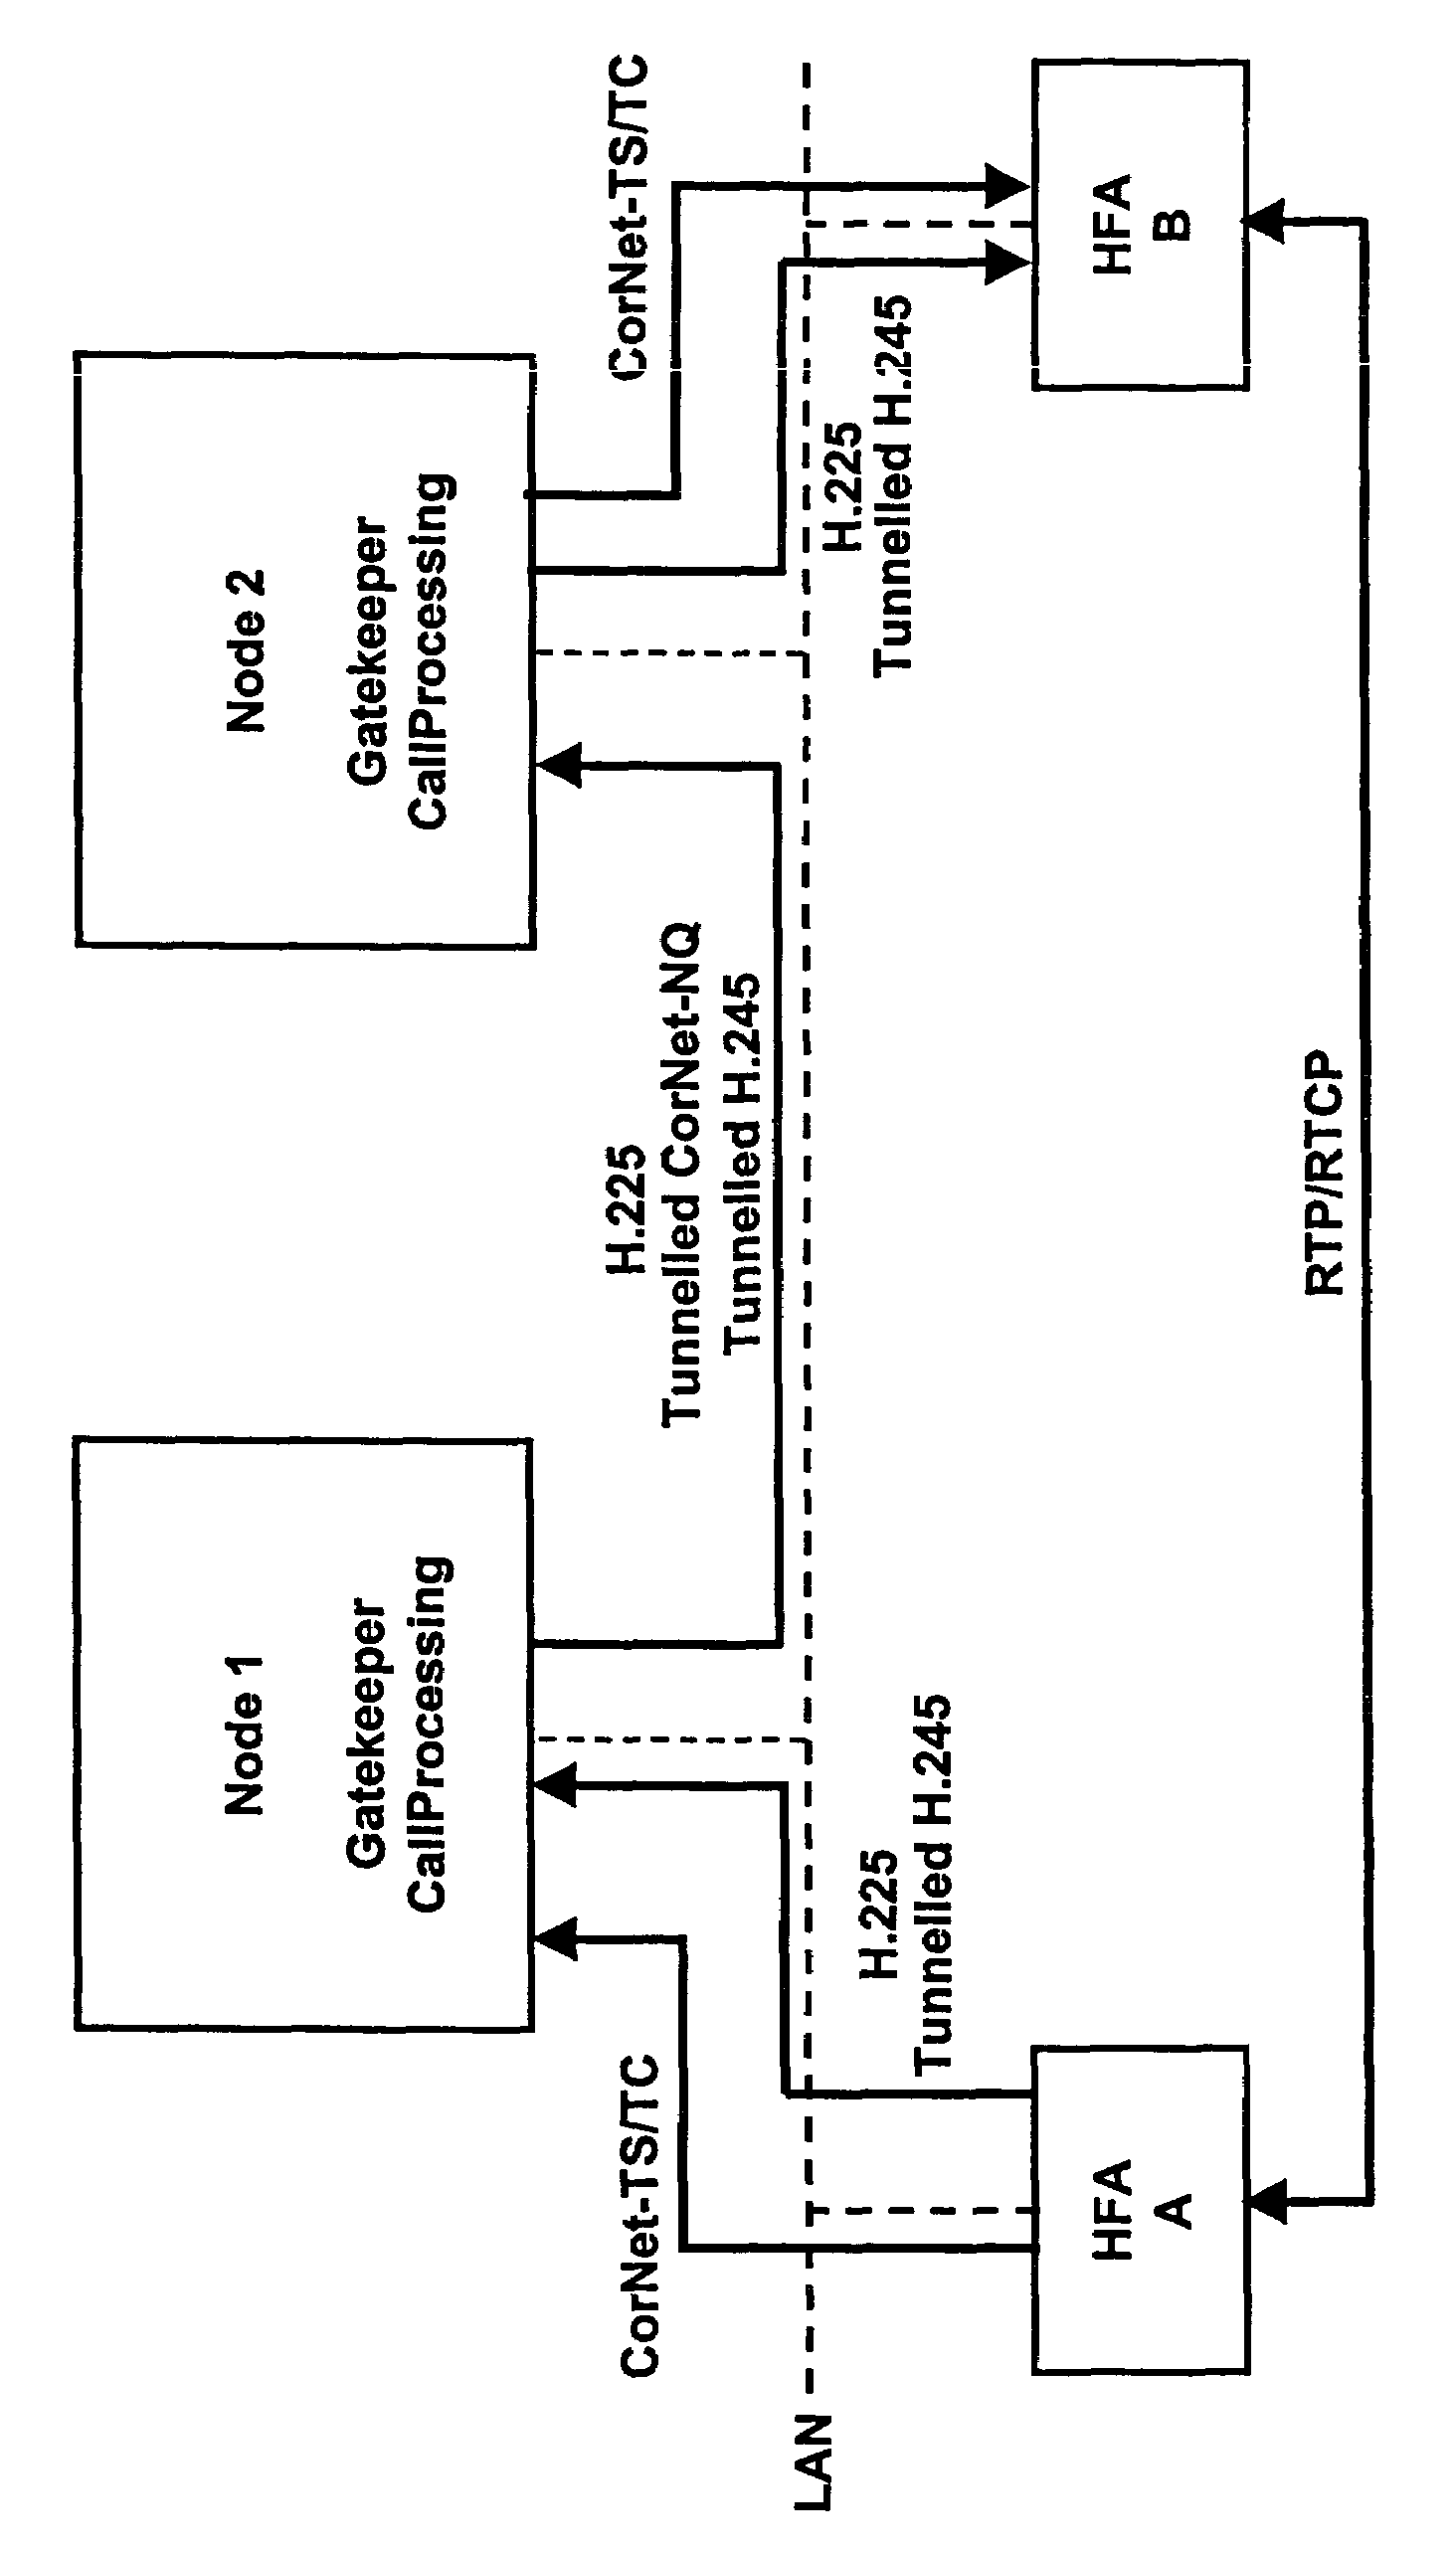 Method for setting up a useful data link between terminals in a VoIP system